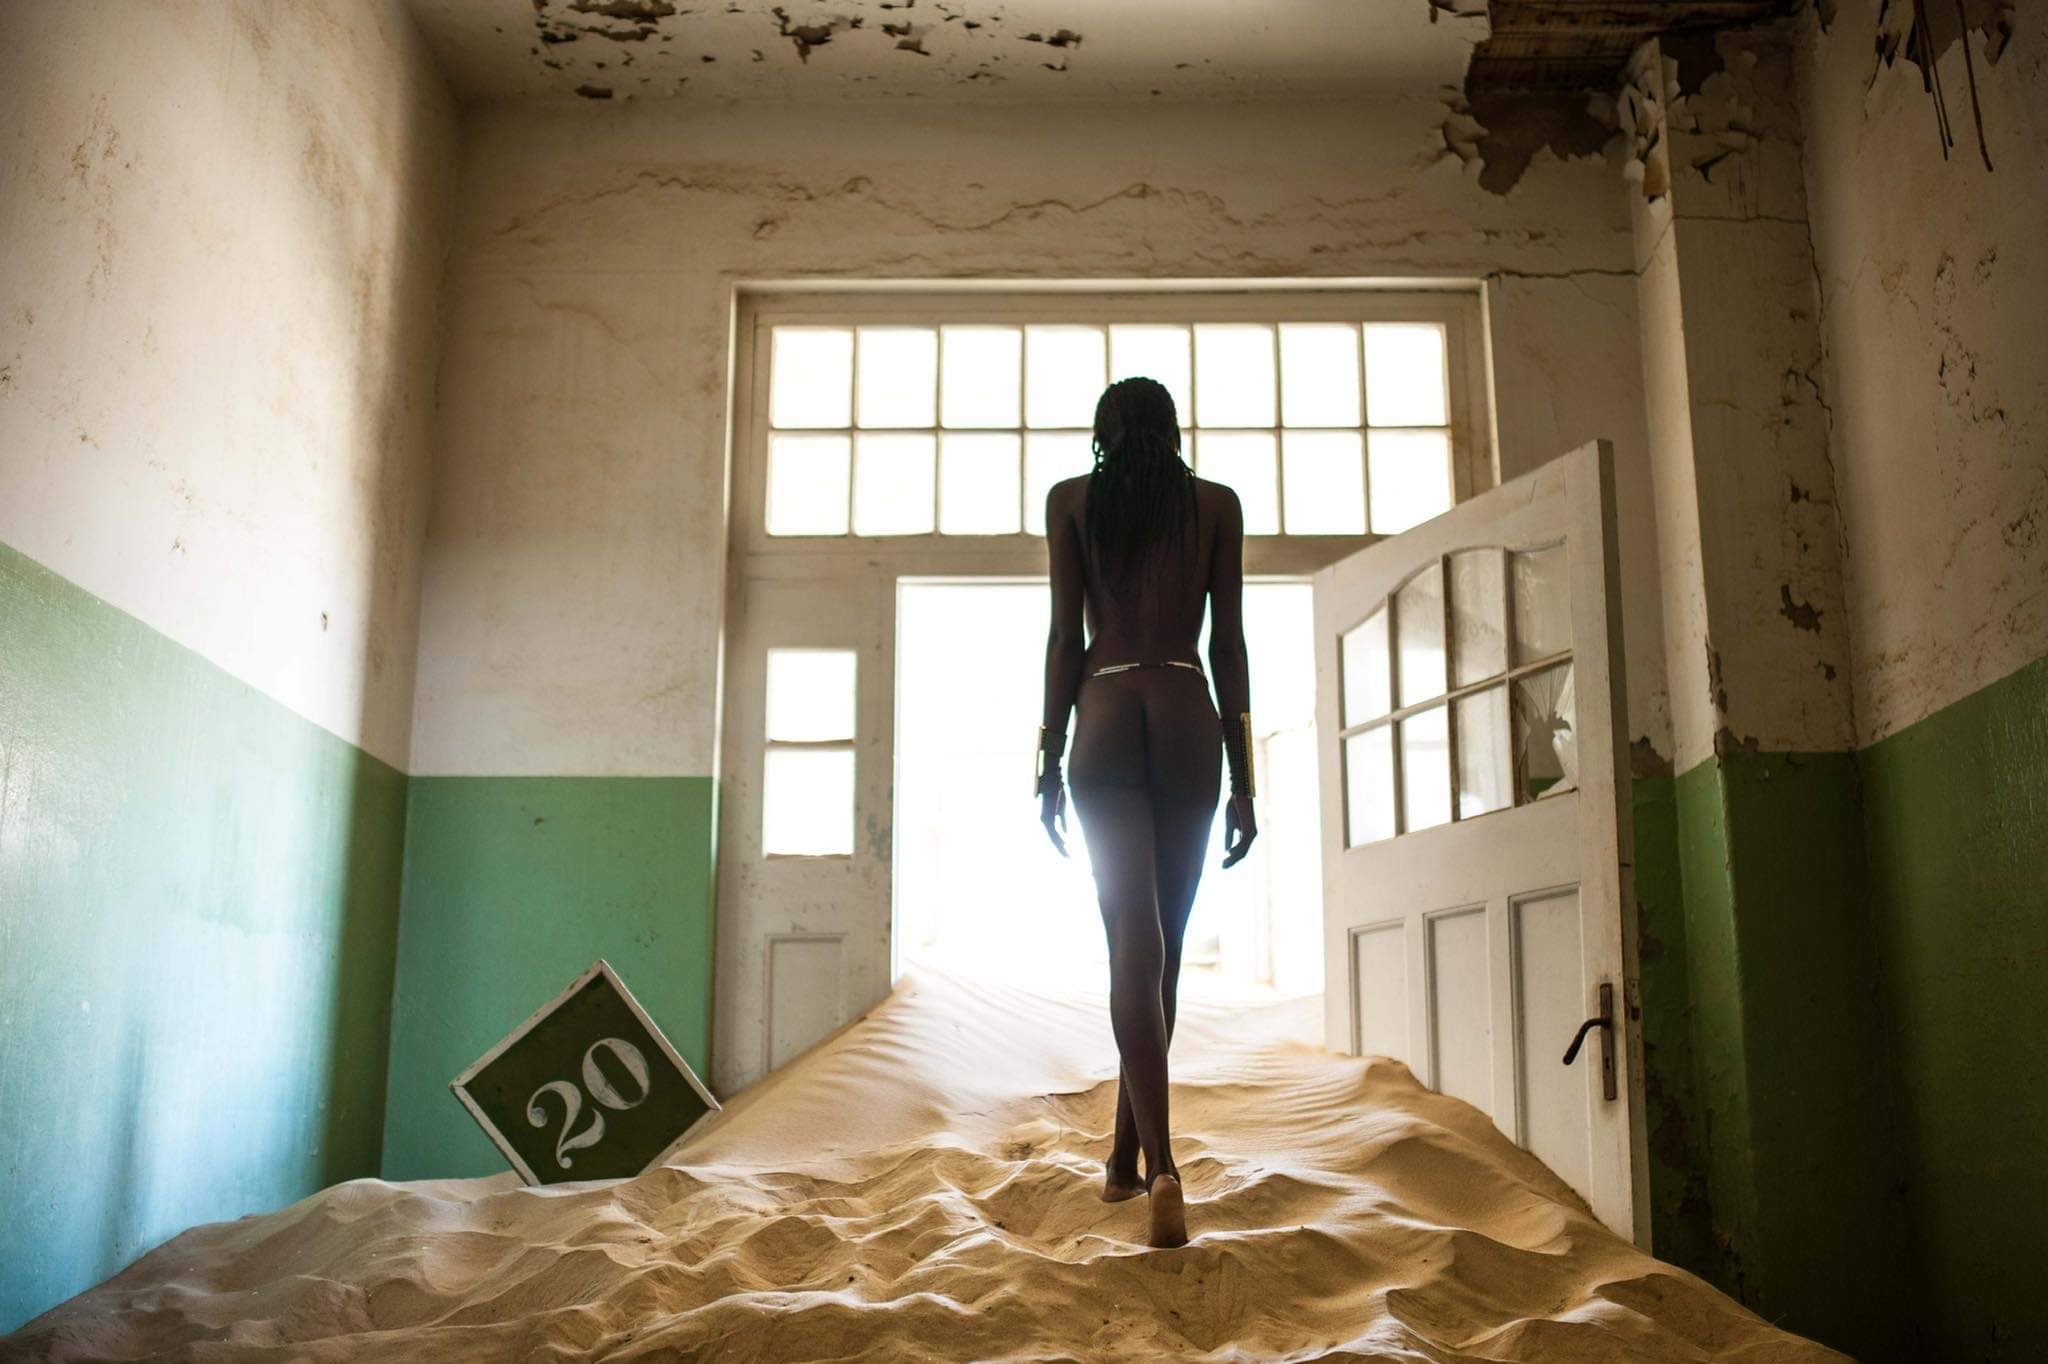 NAMIBIA’S Otherworldly Ghost Town<br>KOLMANSKOP: Diamonds, Dust and the Demise<br>of a Desert Boomtown